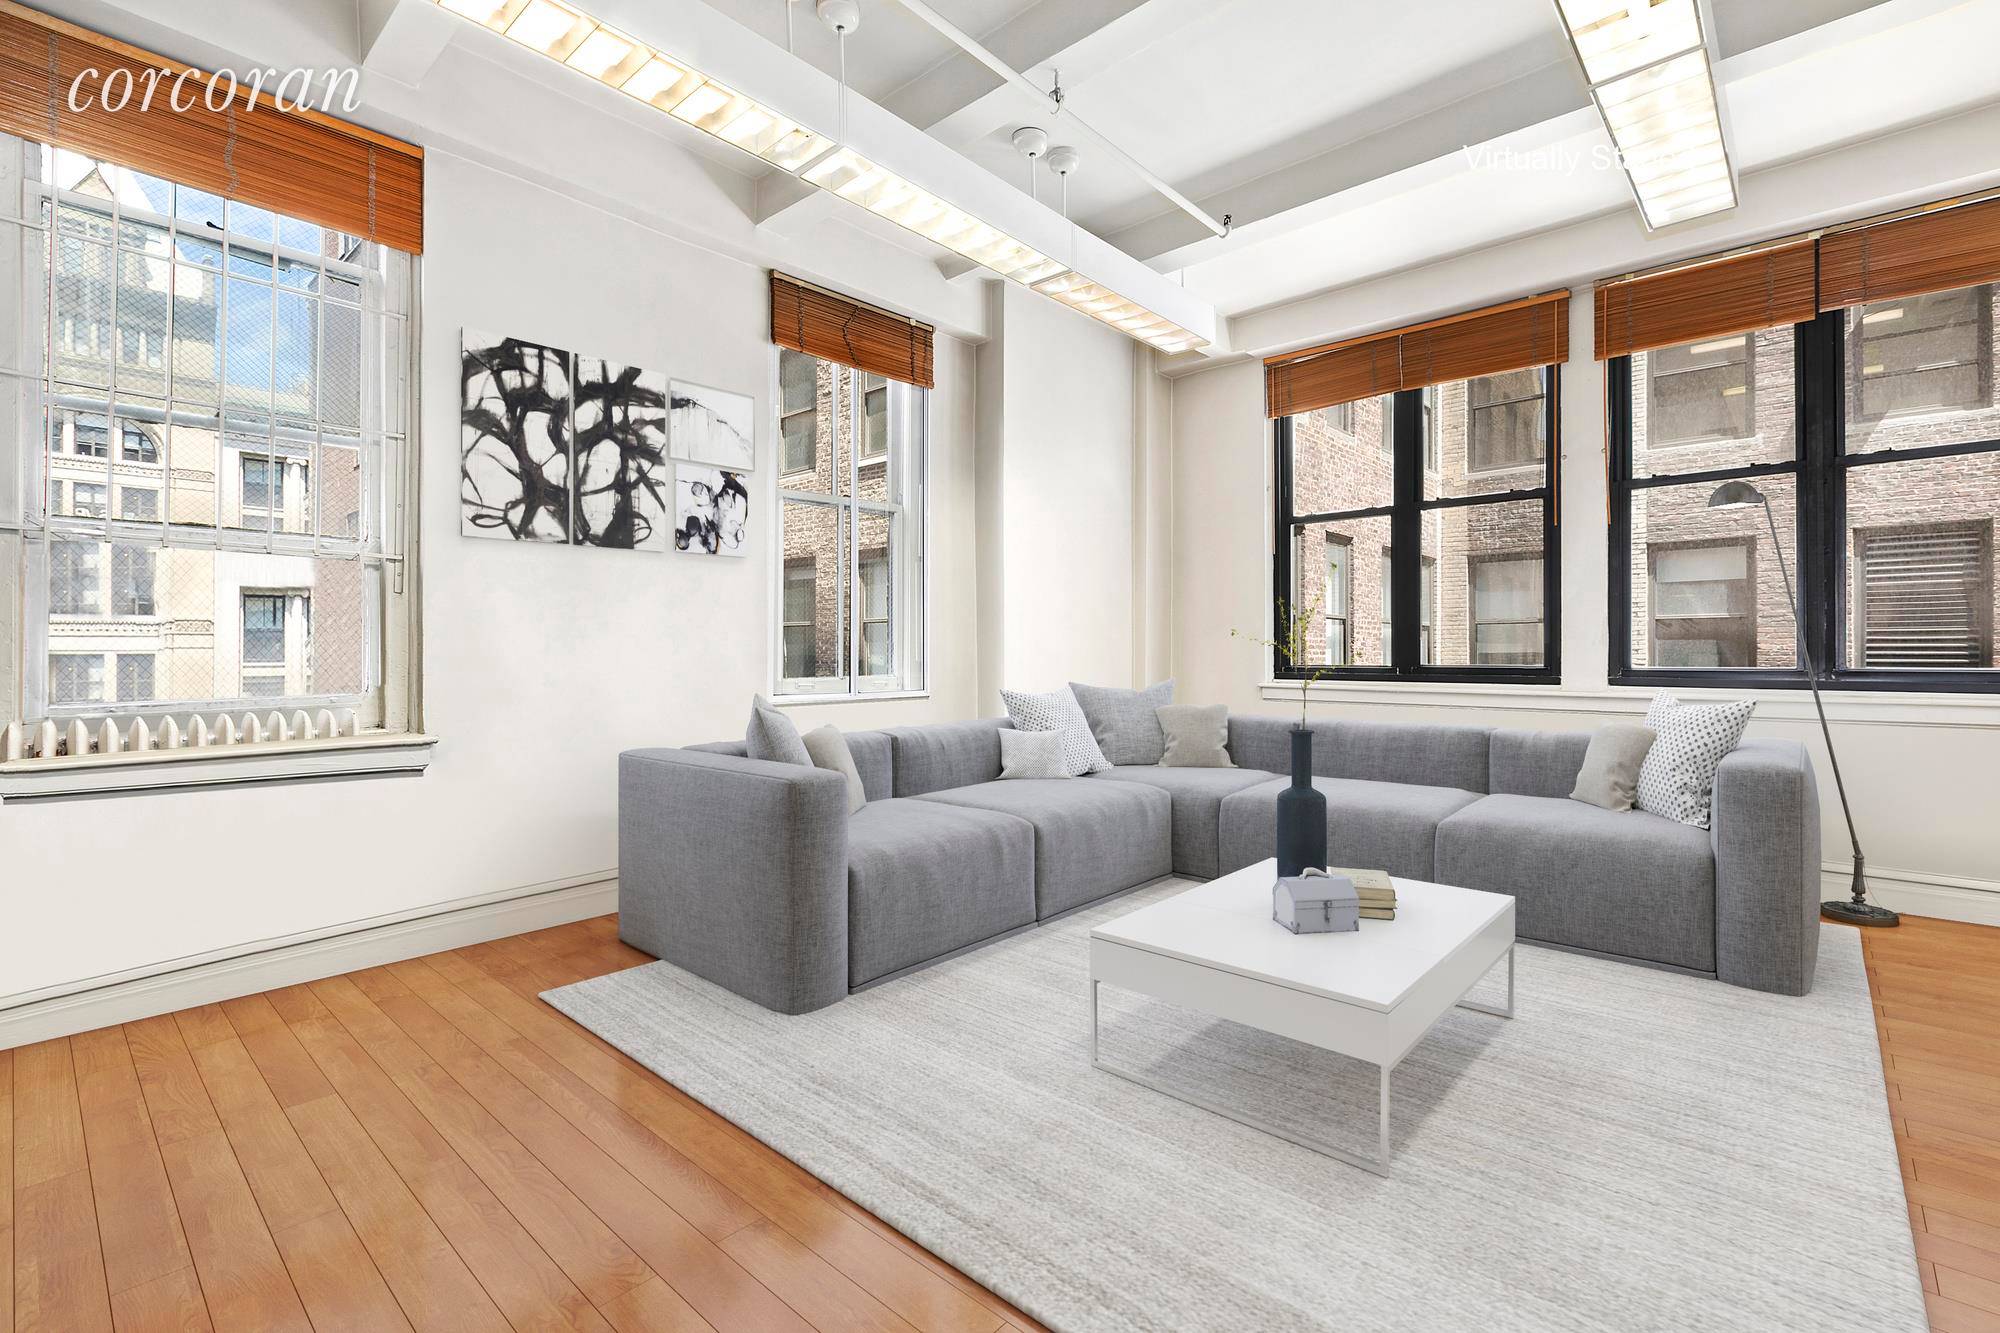 Located on the 8th floor of the Holtz House in the heart of the Flatiron District, a rarely available prewar loft condo is now on the market.